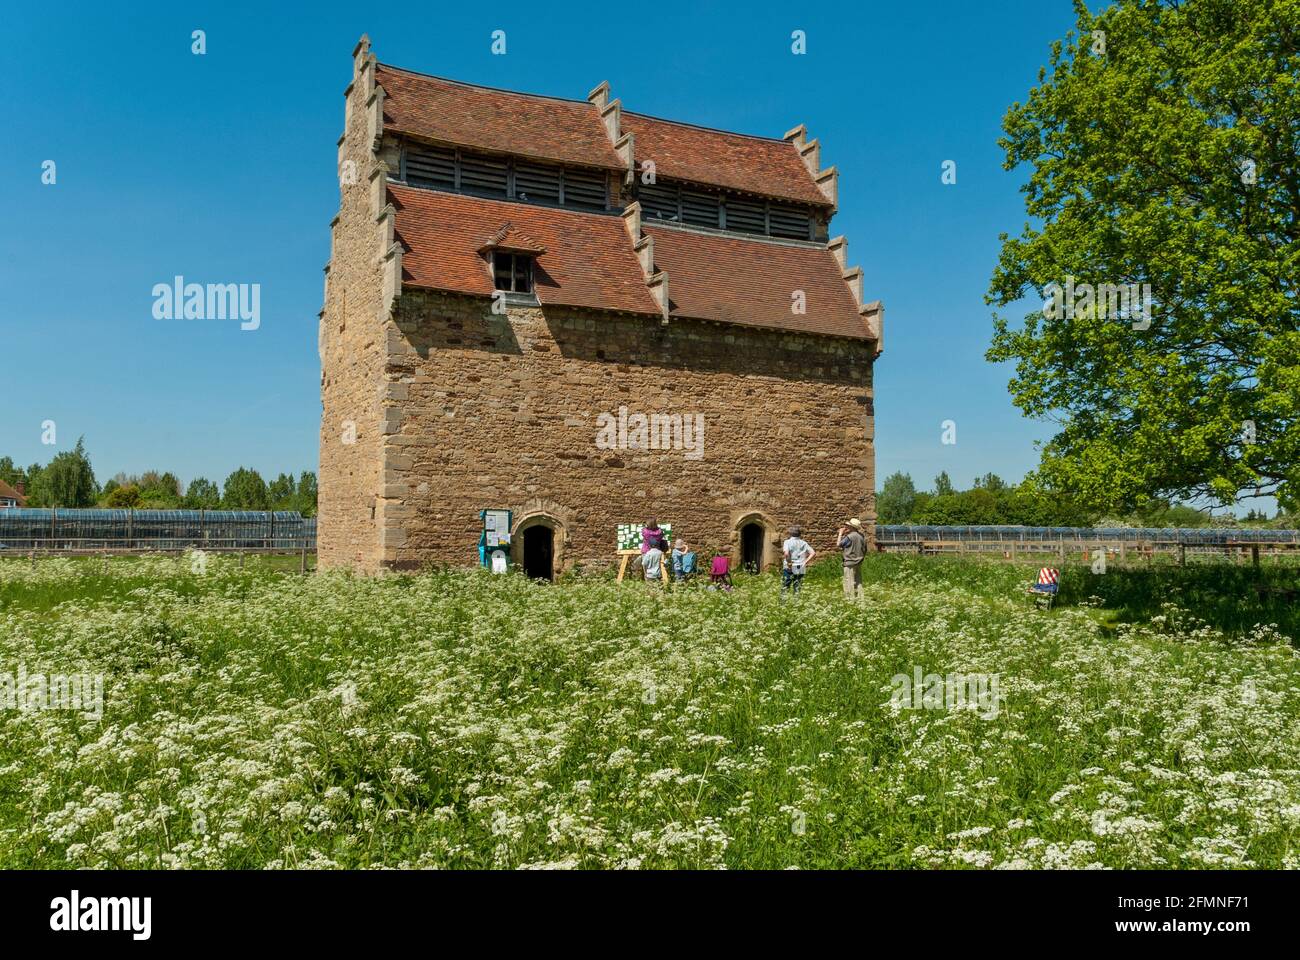 Willington Dovecote, built 1541 by Sir John Gostwick, Bedfordshire UK; National Trust property photographed from a public highway. Stock Photo